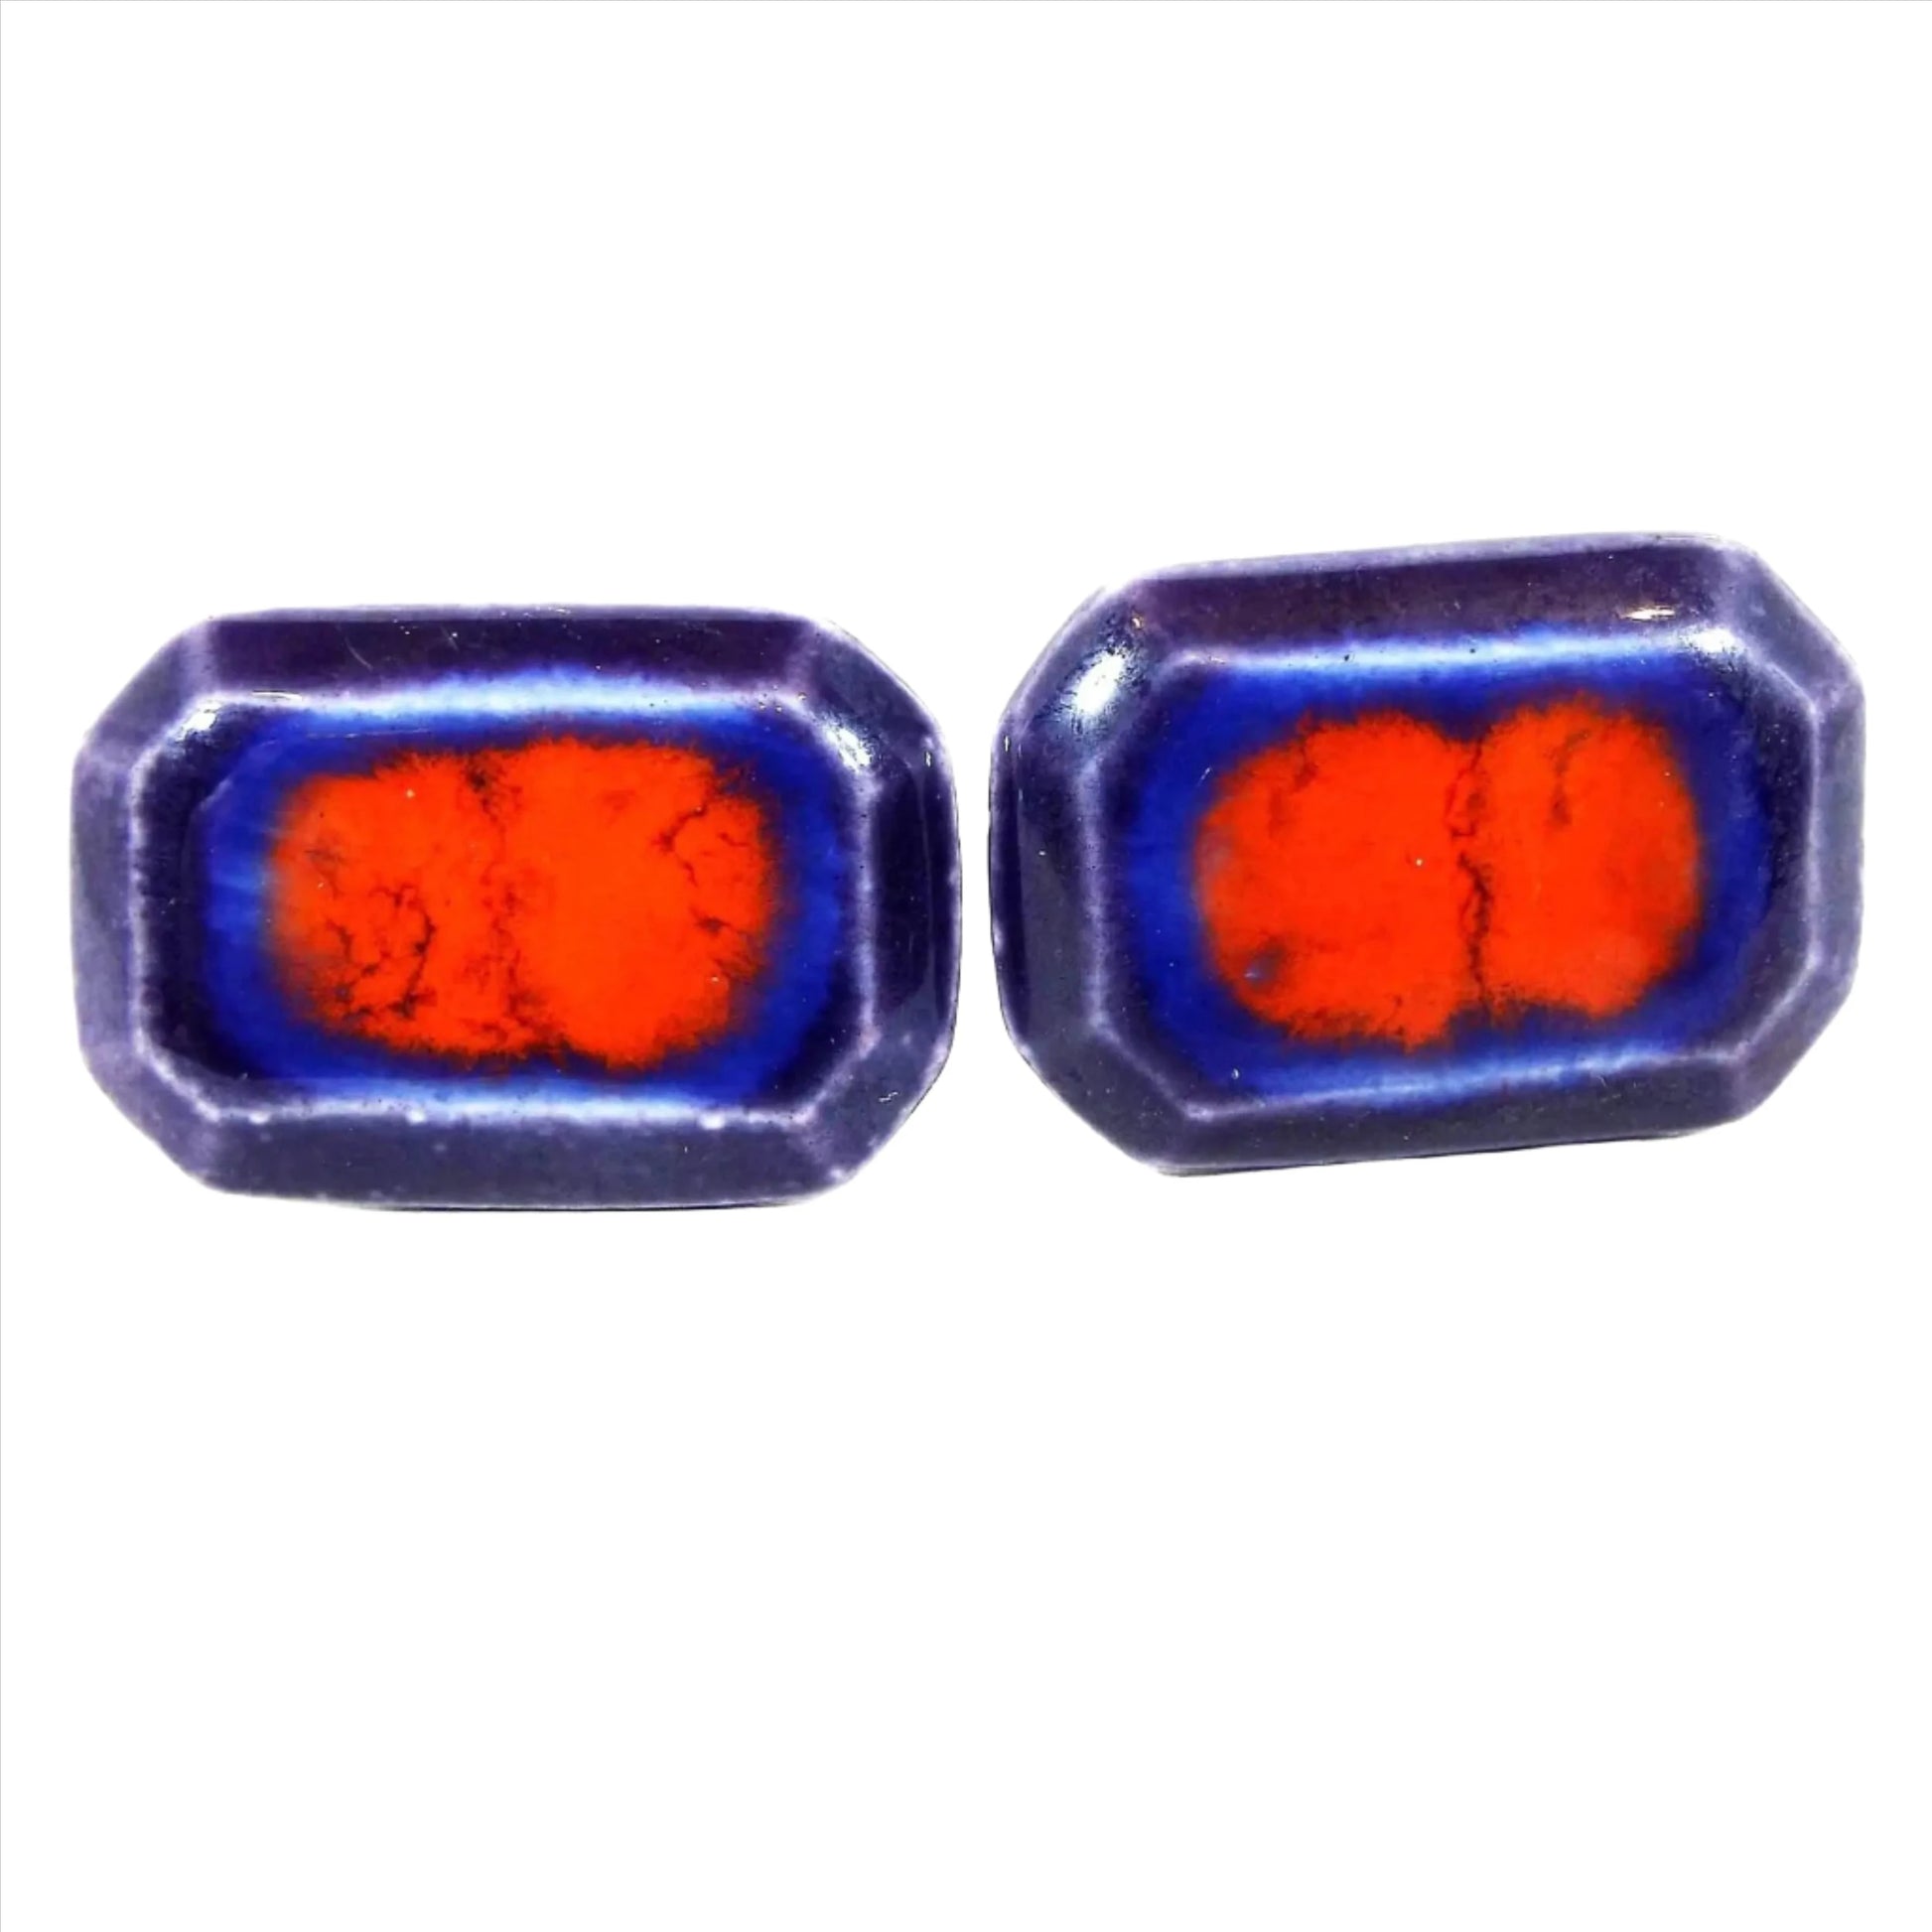 Front view of the retro vintage ceramic cufflinks. They are a long octagon shape with shades of dark and bright blue with bright red in the middle.